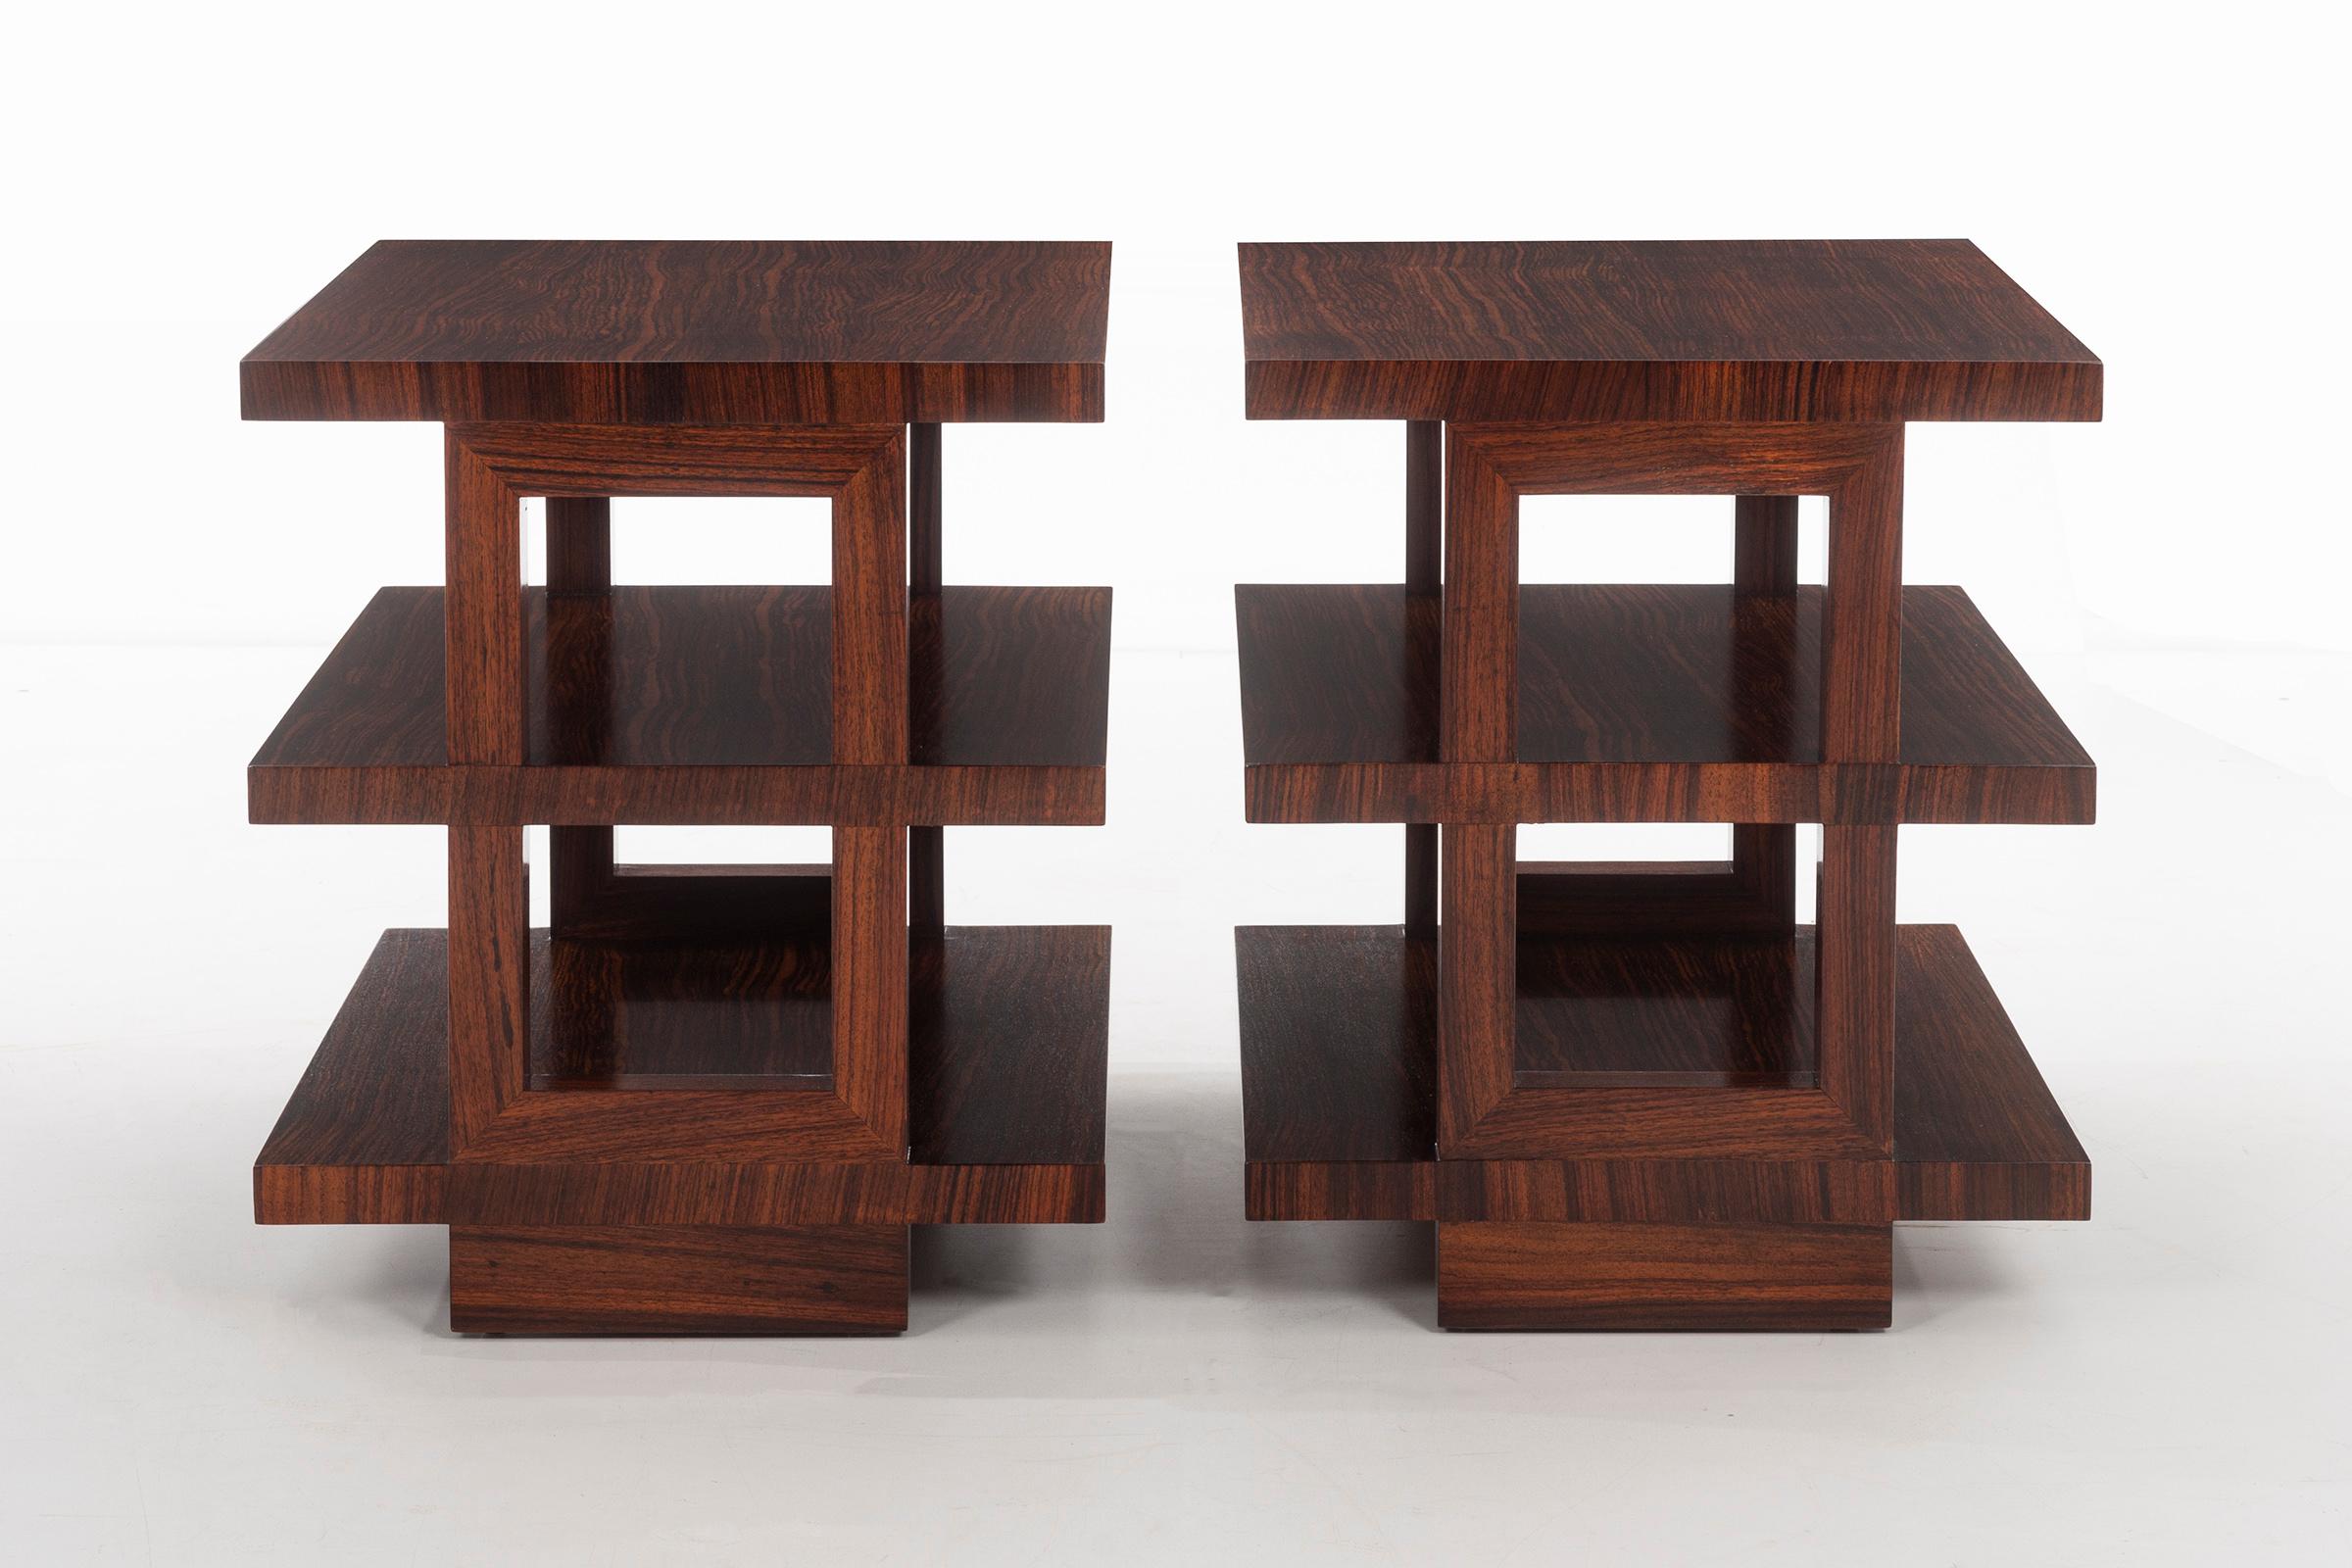 Wormley for Dunbar exceptional lamp tables, greatly figured graining rosewood.
Branded 